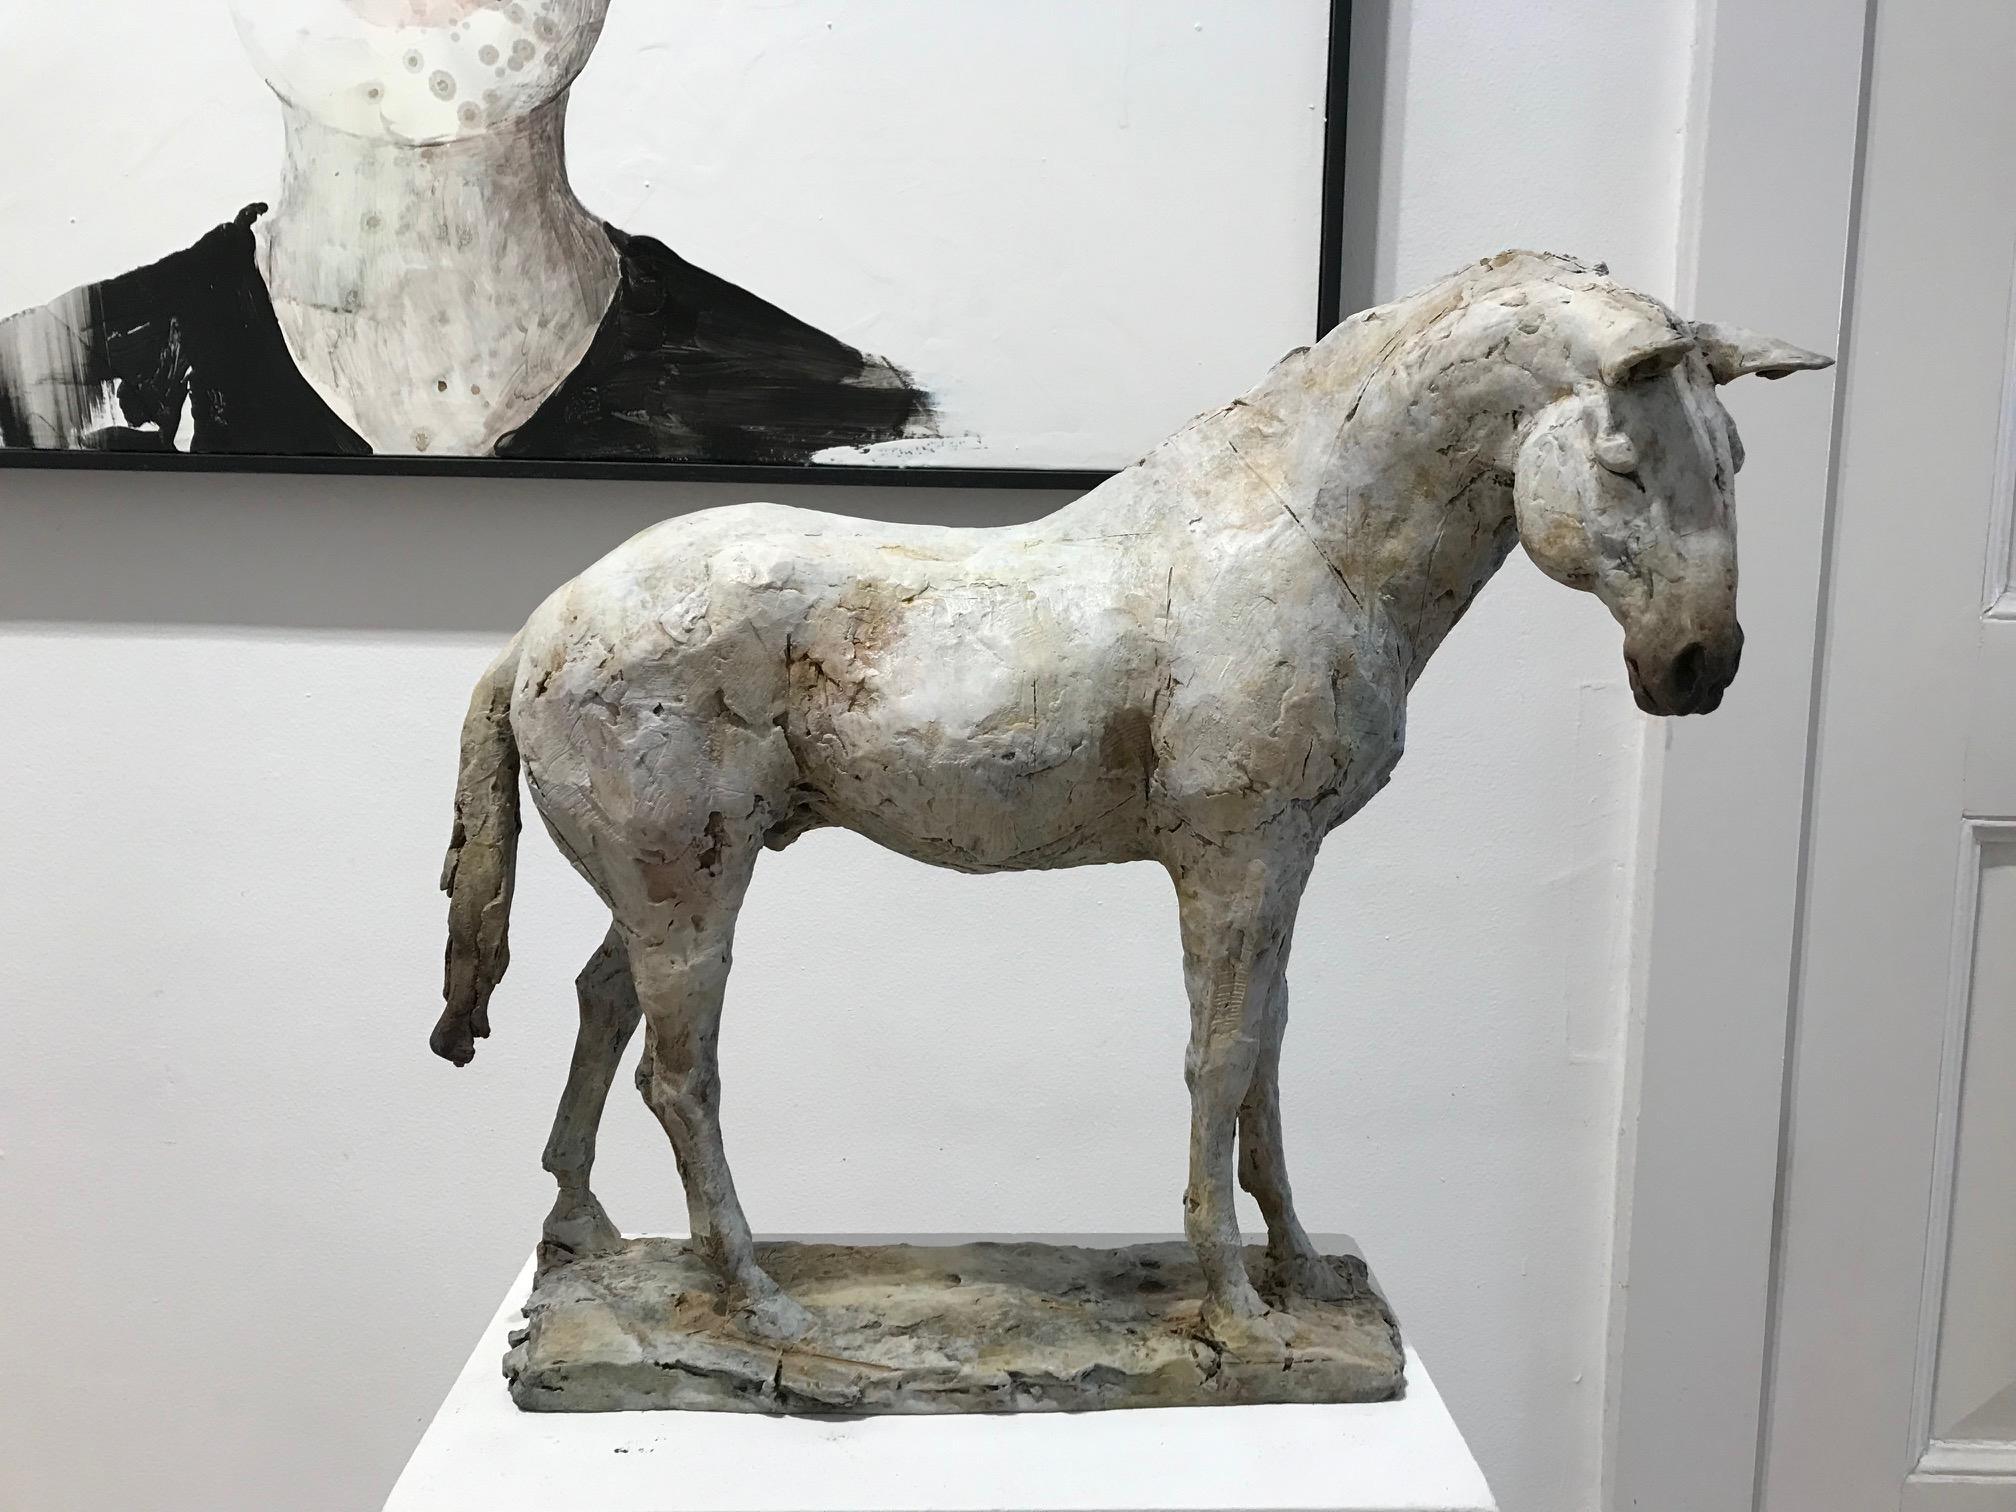 Nichola Theakston (1967) has established herself as one of the UK’s foremost contemporary sculptors working within the animal genre. 

With the ''Resting with Ancients'' Nichola shows how exquisite she can capture the feelings and expressions in an